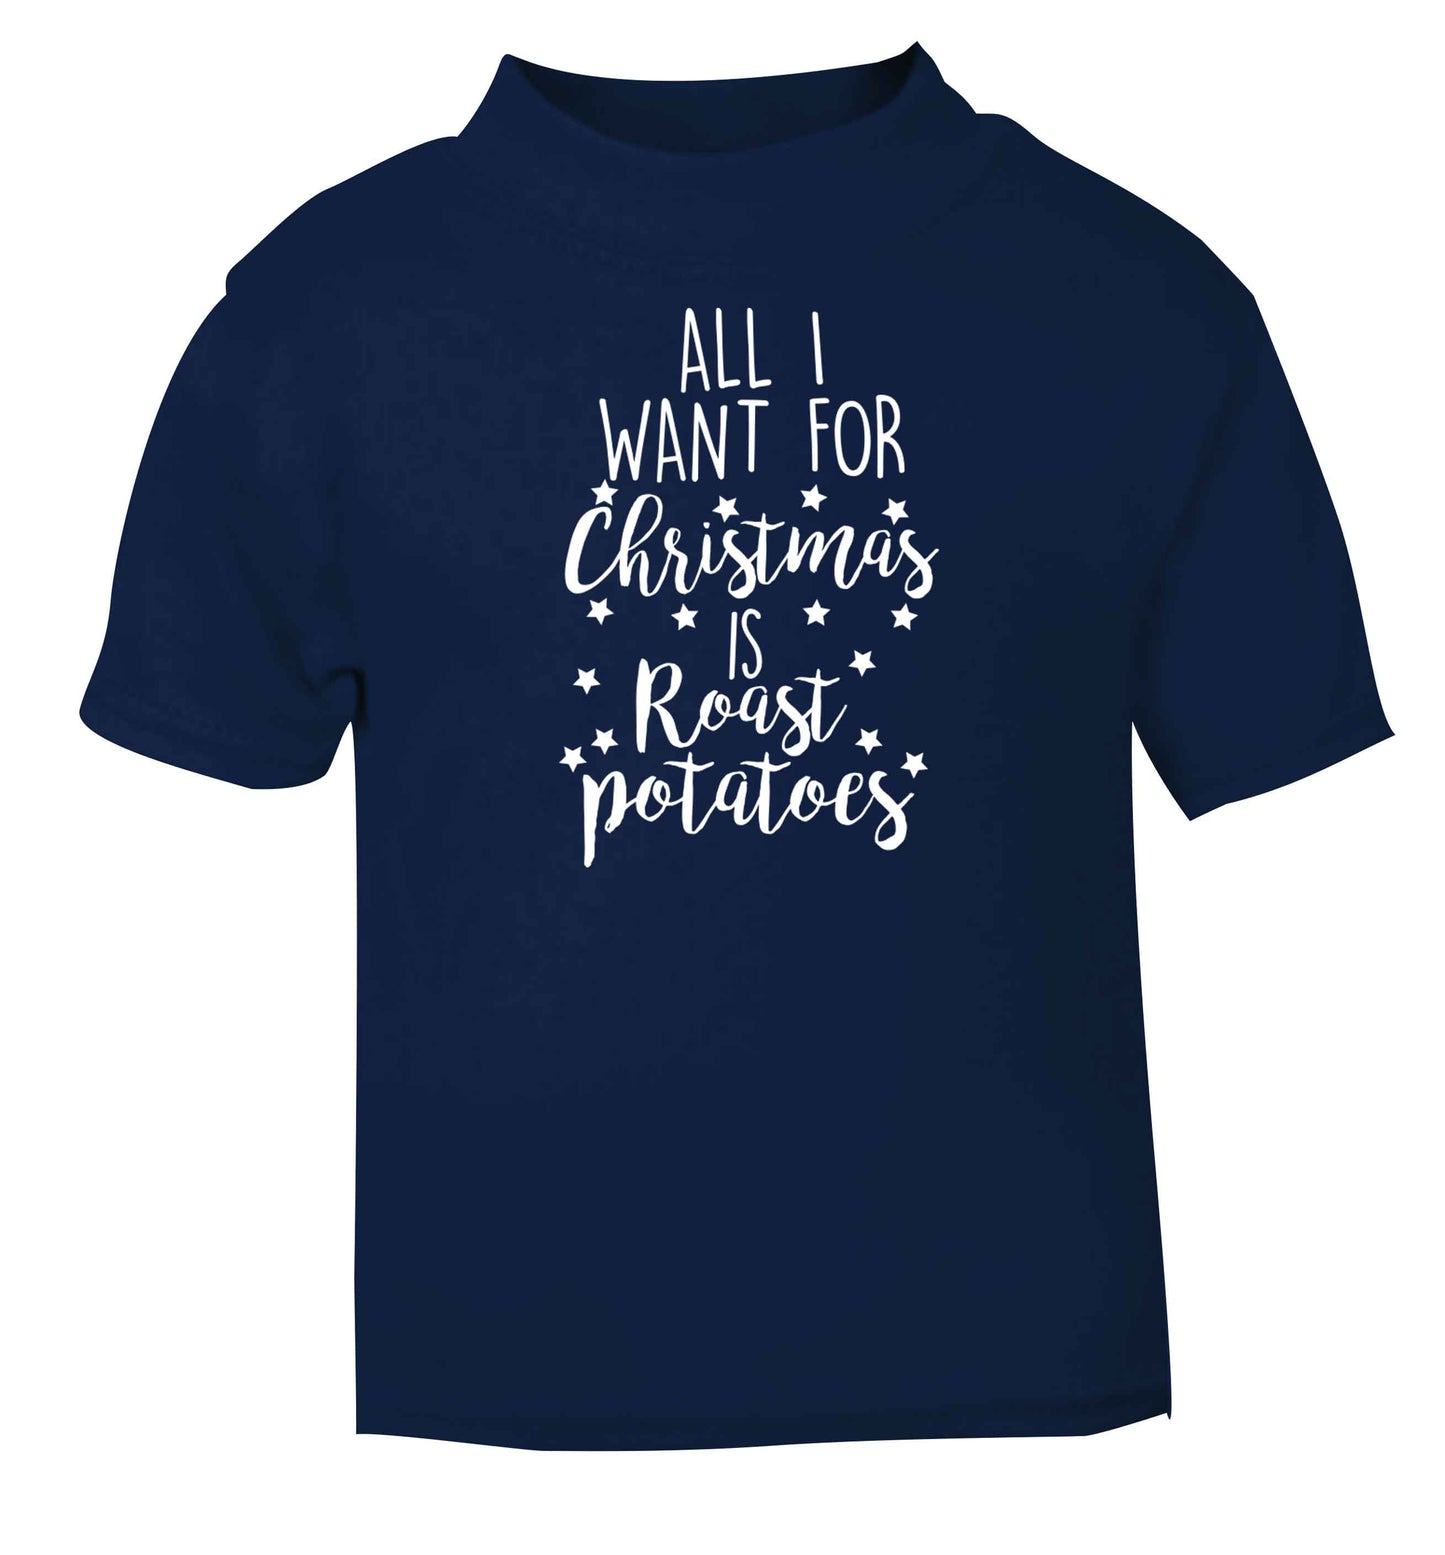 All I want for Christmas is roast potatoes navy baby toddler Tshirt 2 Years